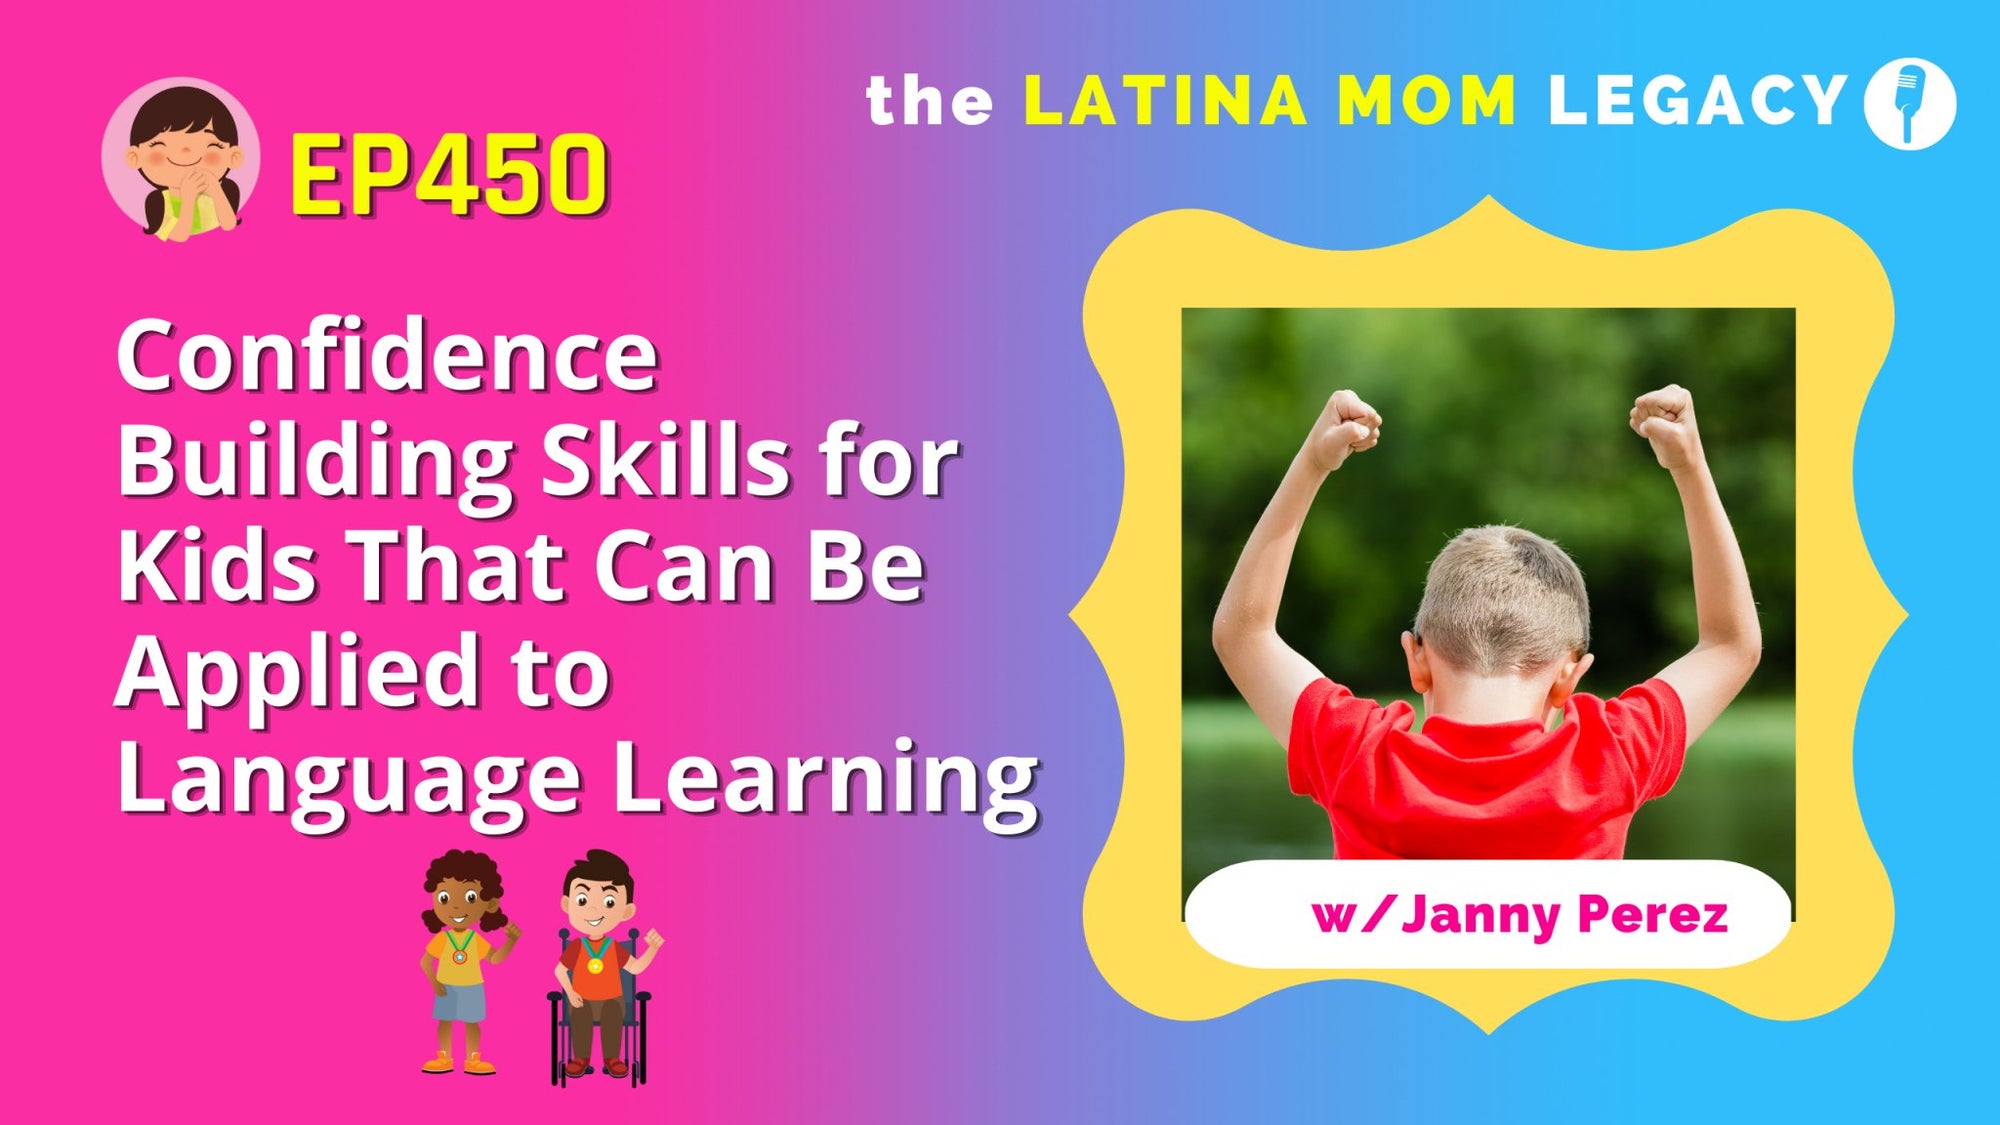 450 - Confidence Building Skills for Kids That Can Be Applied to Language Learning - Mi LegaSi